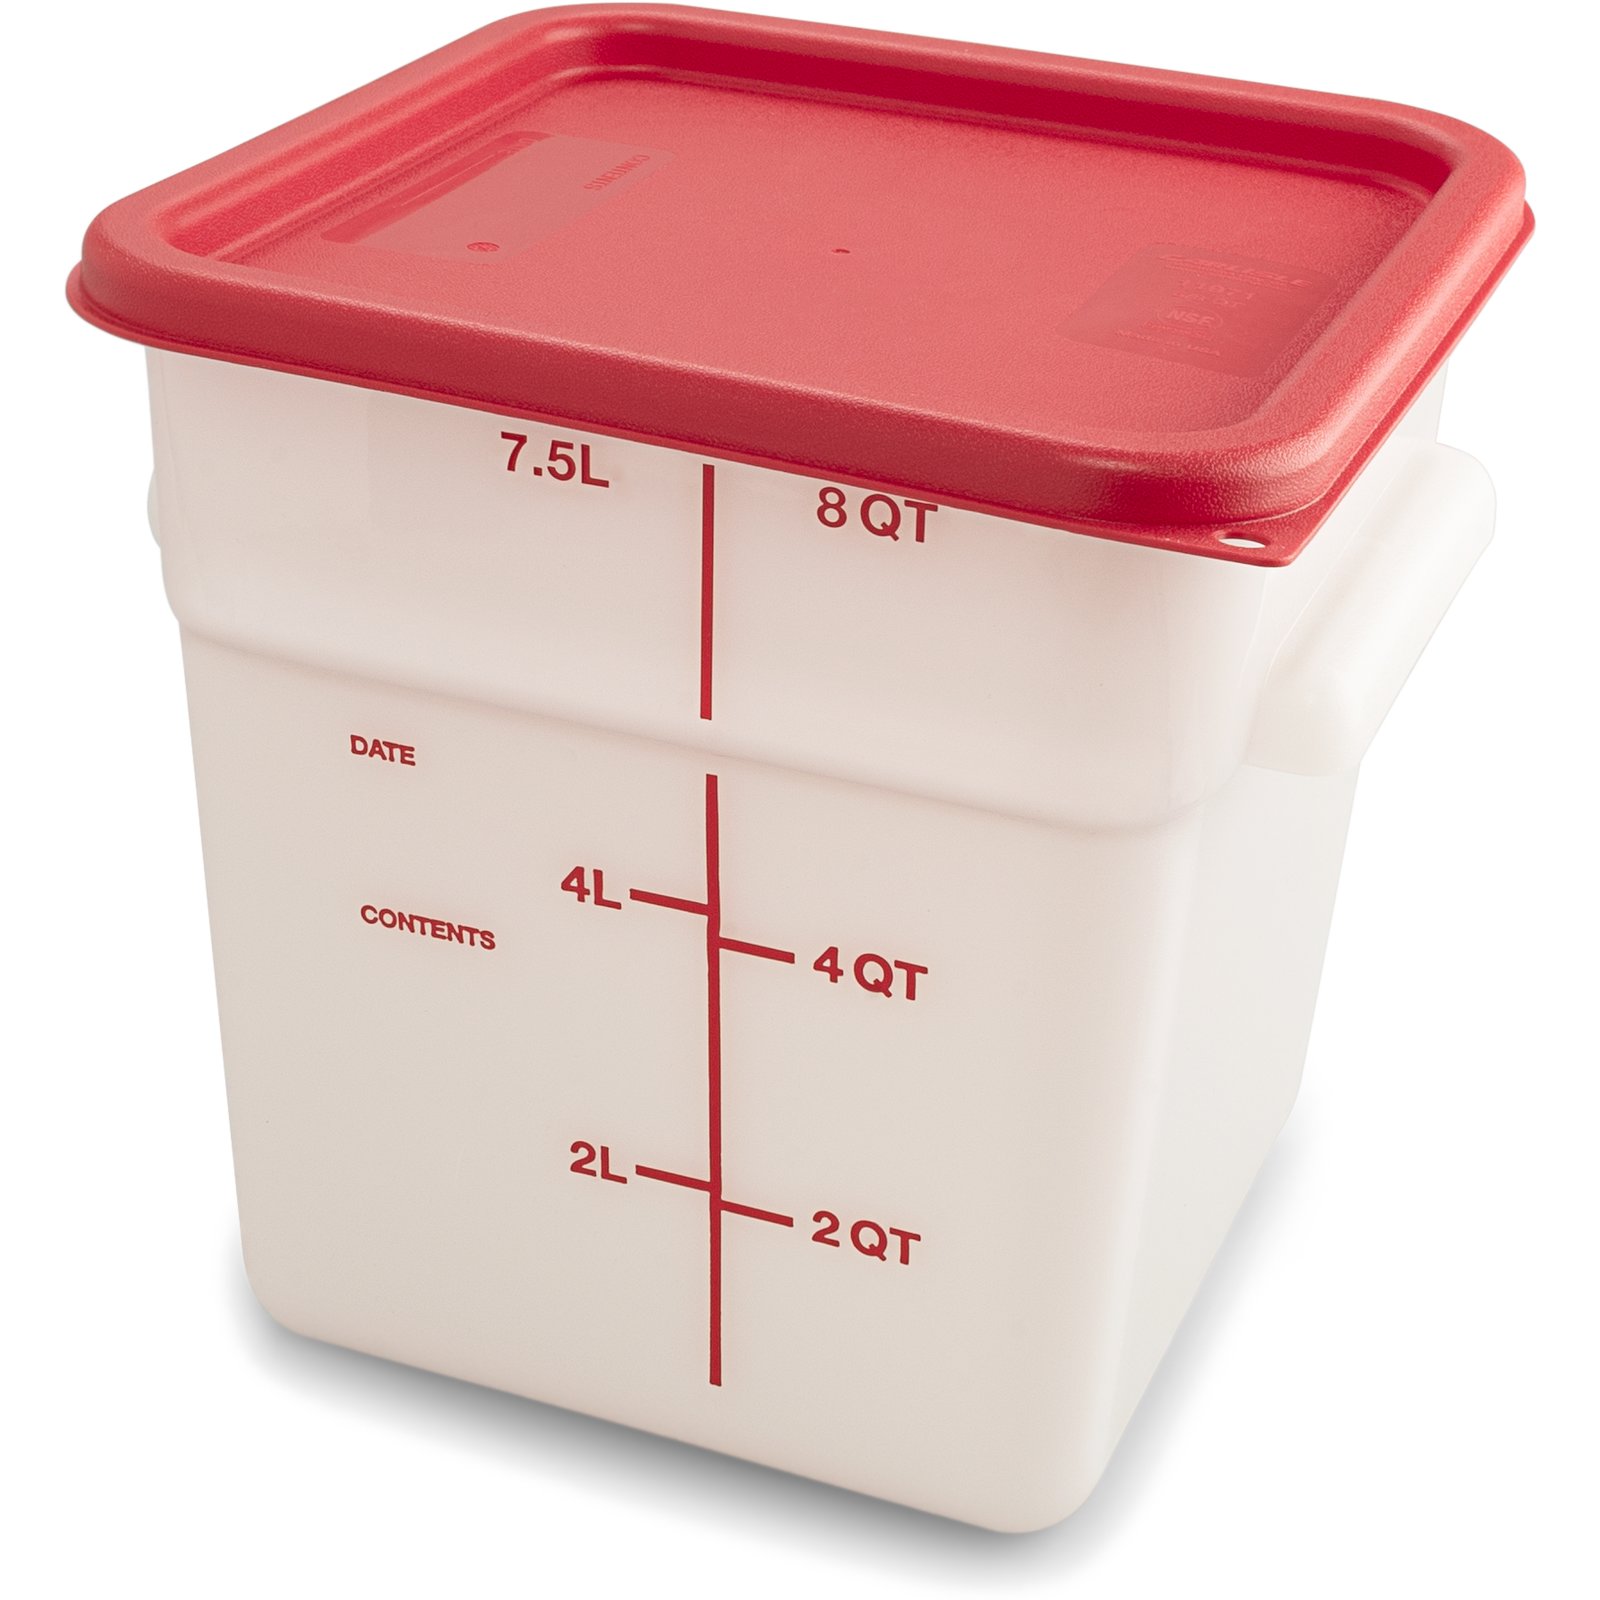 Food Storage Containers - Squares, Rounds and Food Boxes